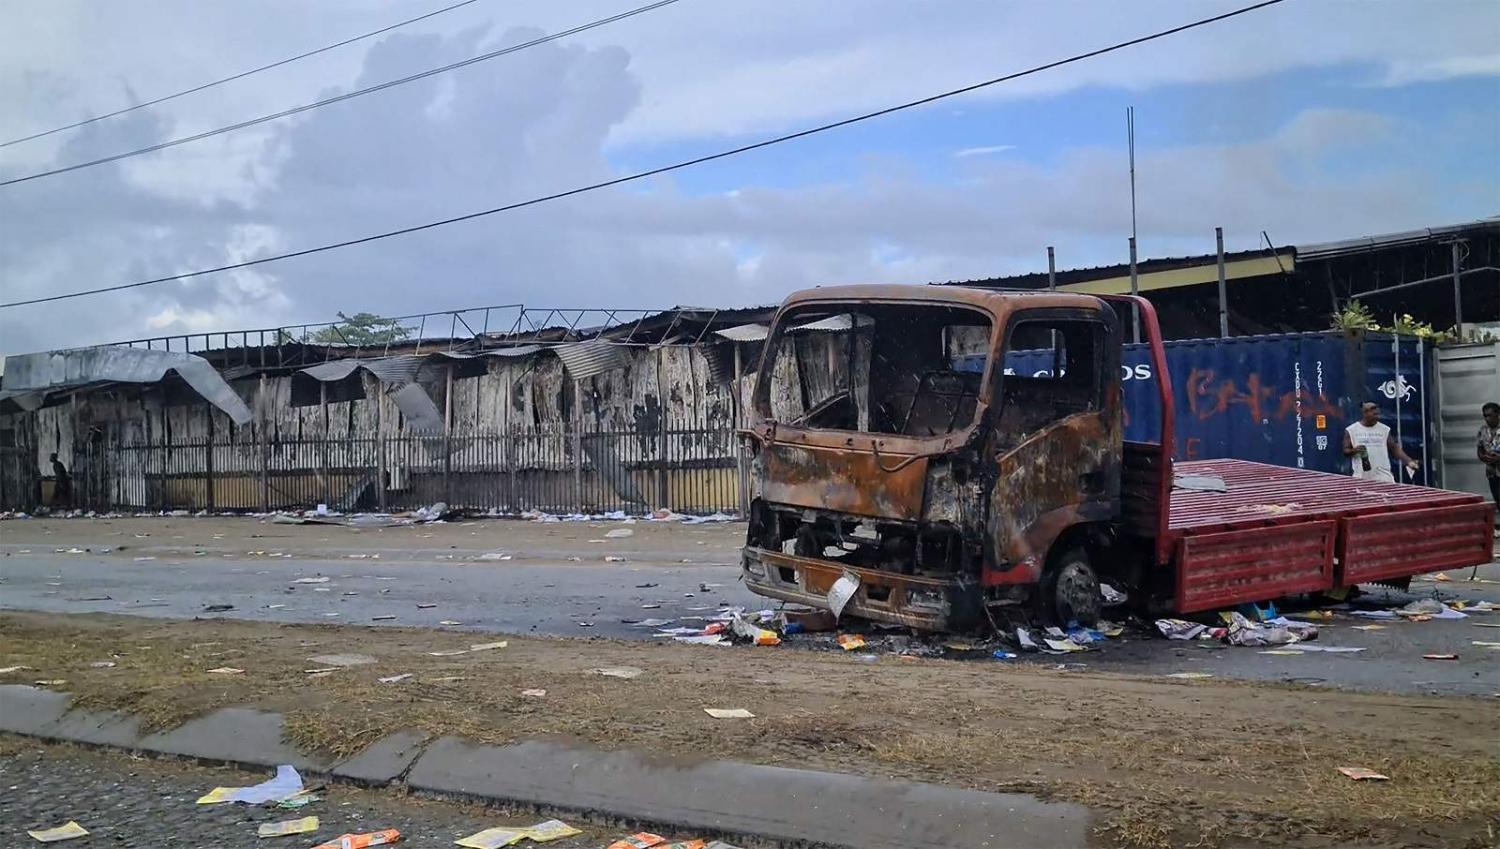 The aftermath in Honiara after days of rioting following political violence that prompted the snap deployment of international peacekeepers, November 2021 (Jay Liofasi/AFP via Getty Images)